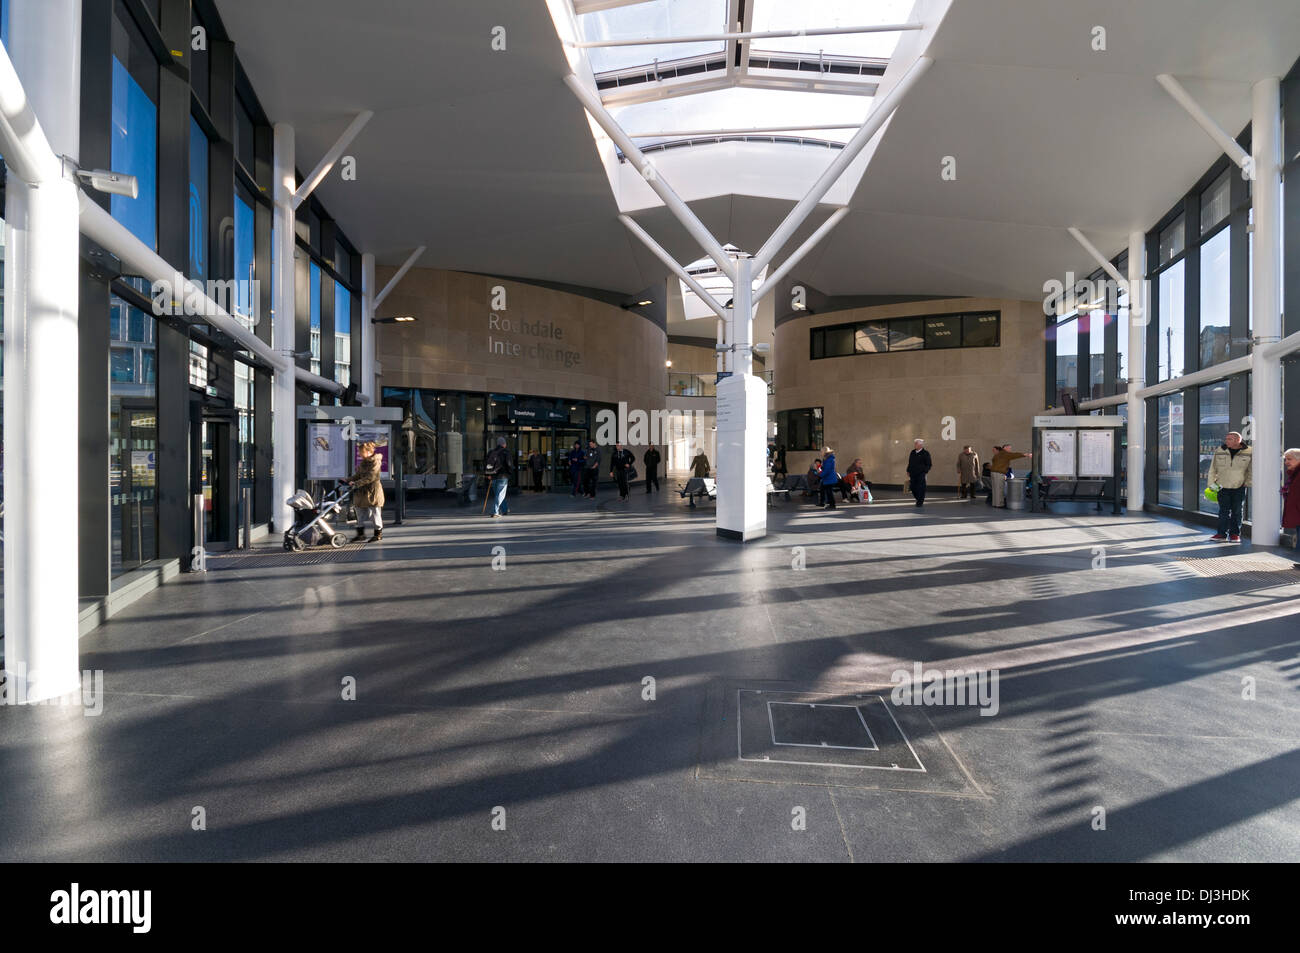 Rochdale Transport Interchange building, Rochdale, Greater Manchester, England, UK.  Opened November 2013. Stock Photo